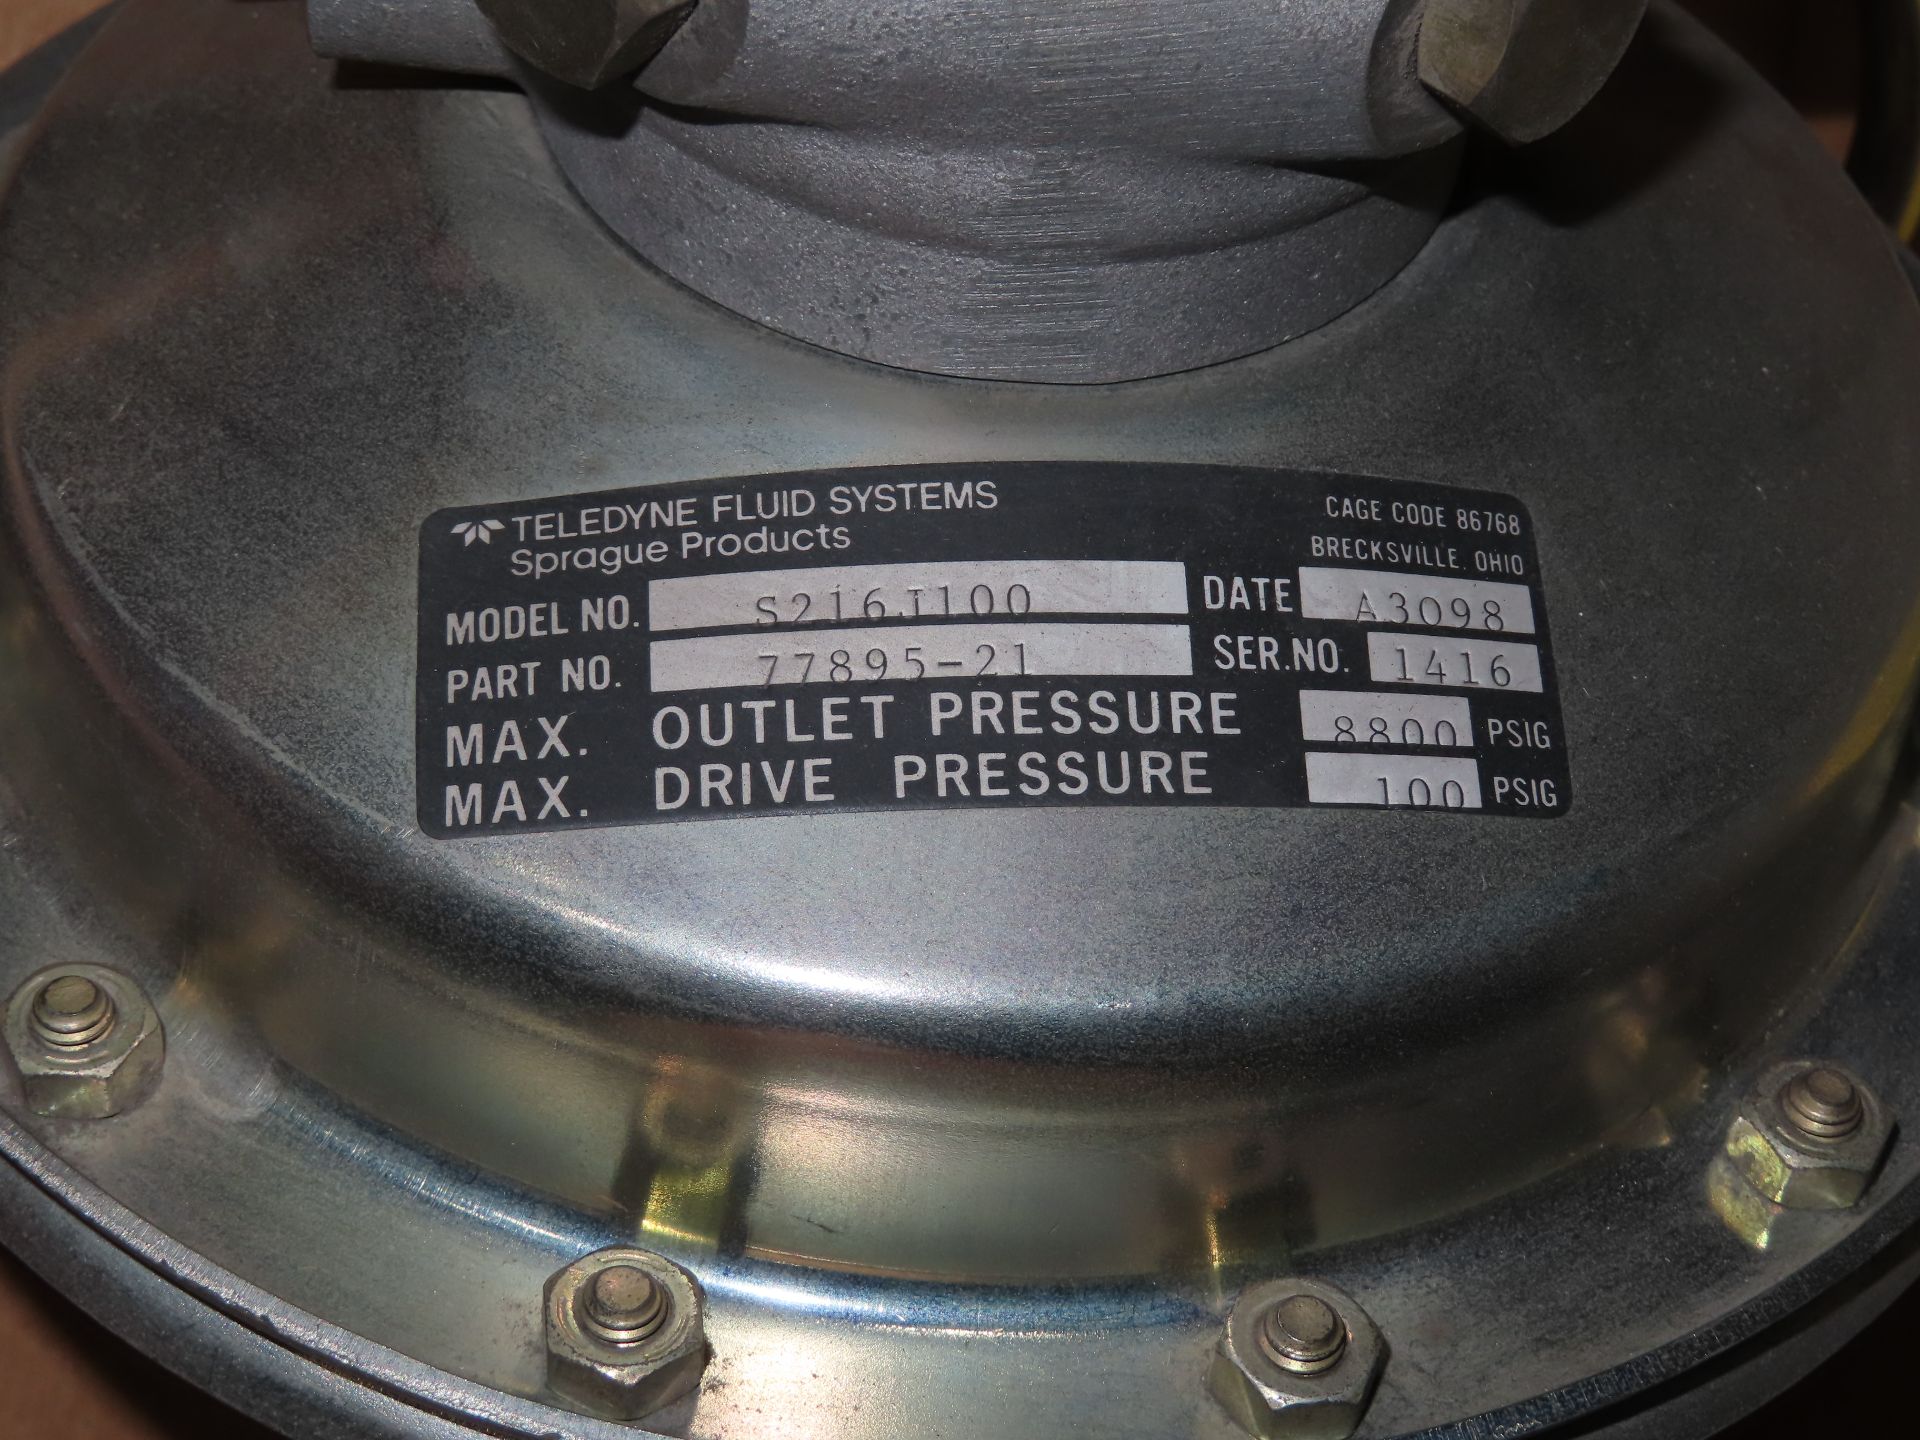 Teledyne fluid systems model S216T100, new old stock, as always with Brolyn LLC auctions, all lots - Image 2 of 2